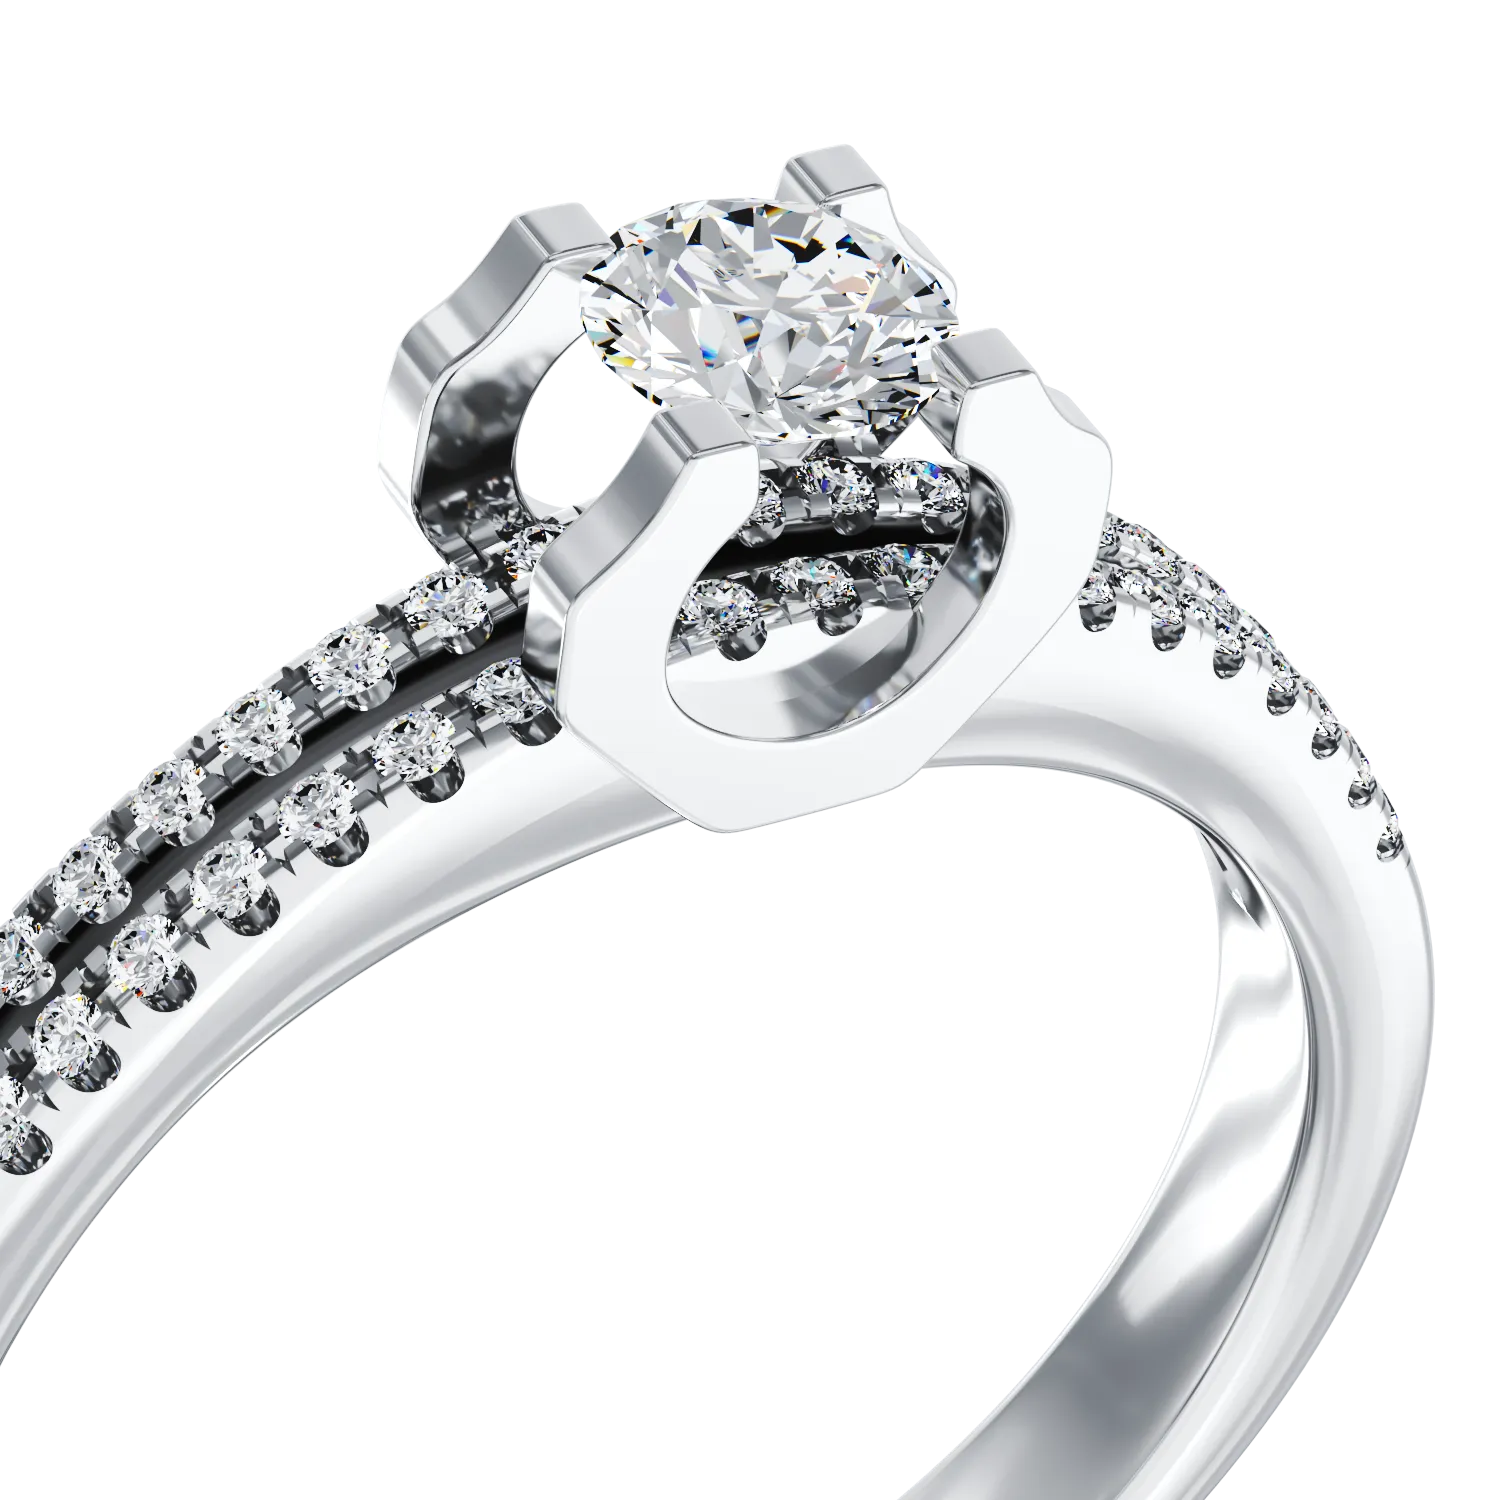 18K white gold engagement ring with 0.19ct diamond and 0.15ct diamonds